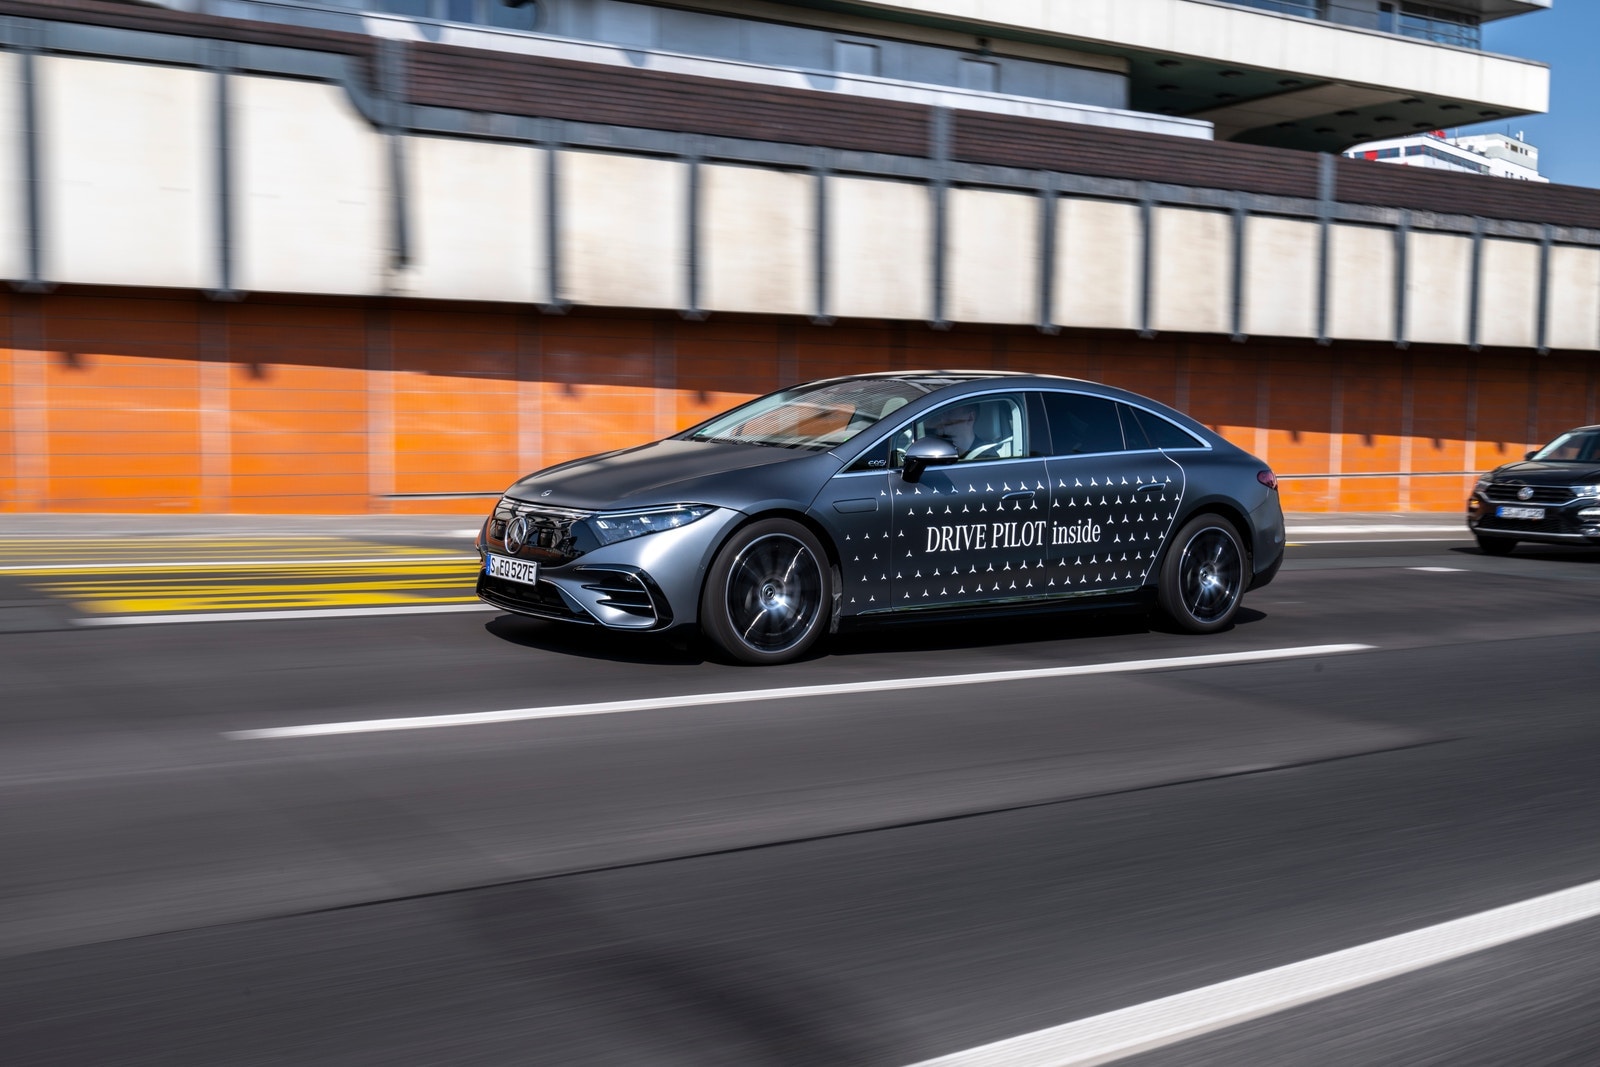 Mercedes-Benz EQS with Drive Pilot on the road